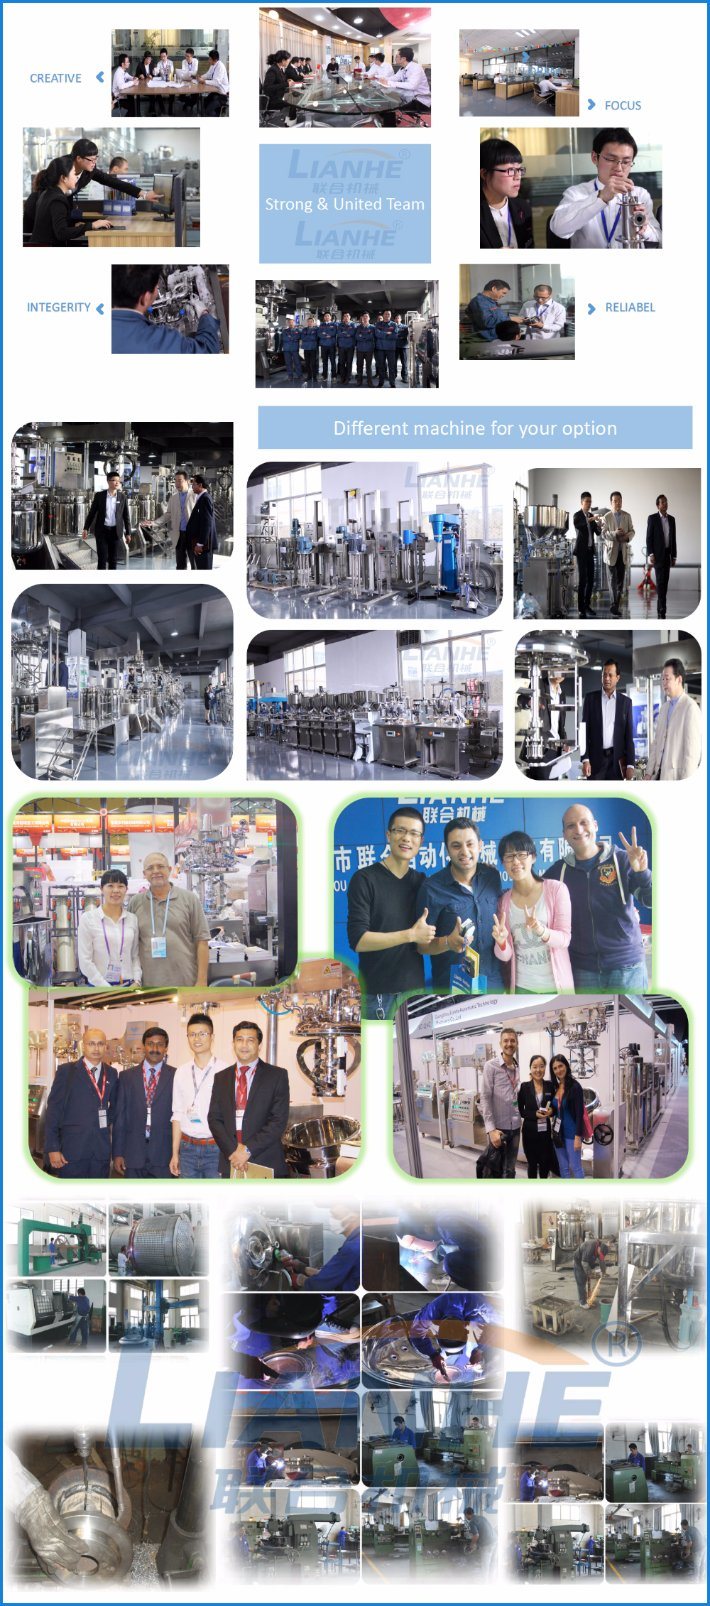 Rich Experience RO Reverse Osmosis Water Treatment System